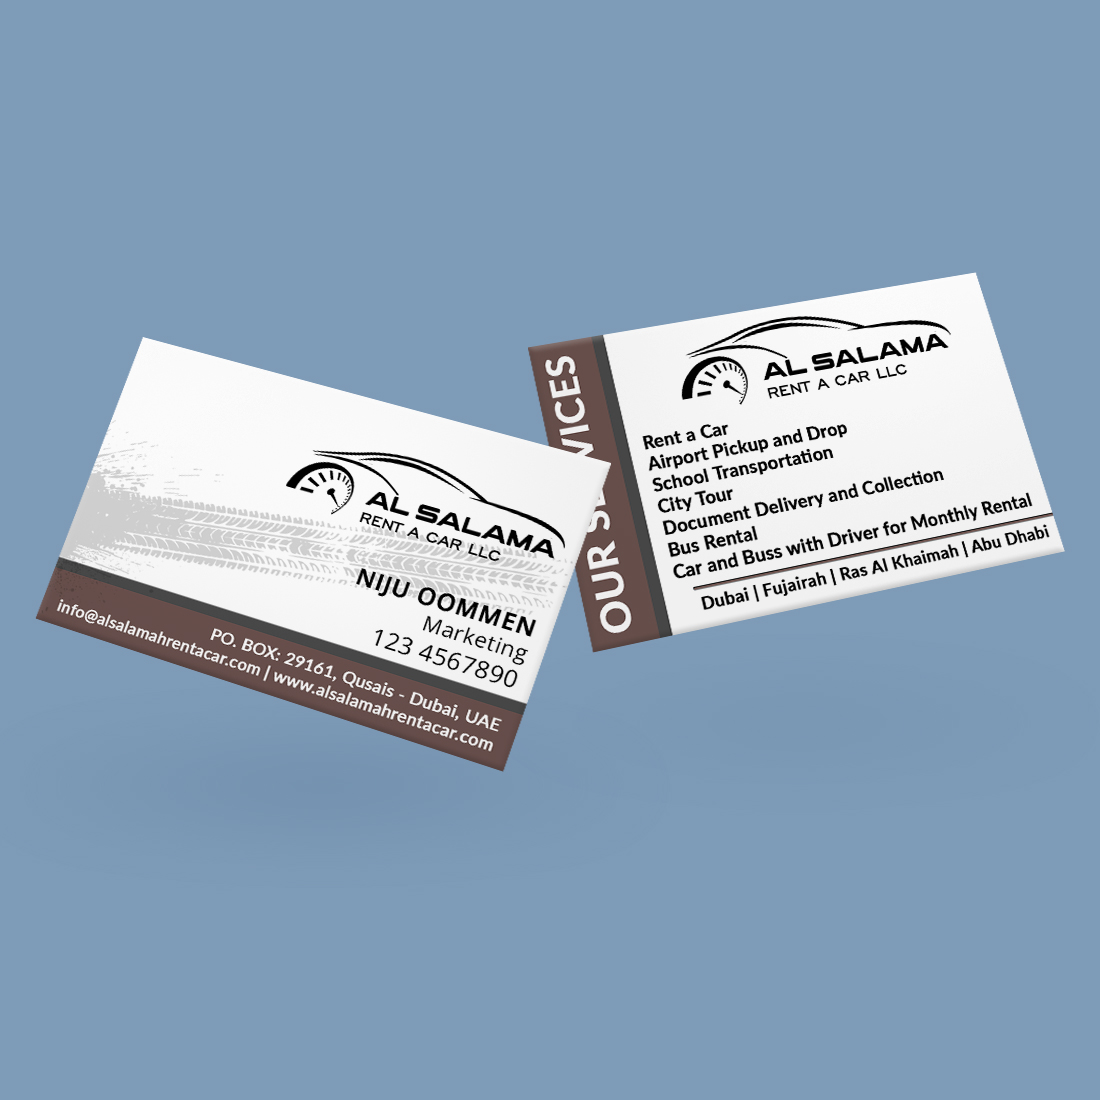 Two business cards designed to look like a car.